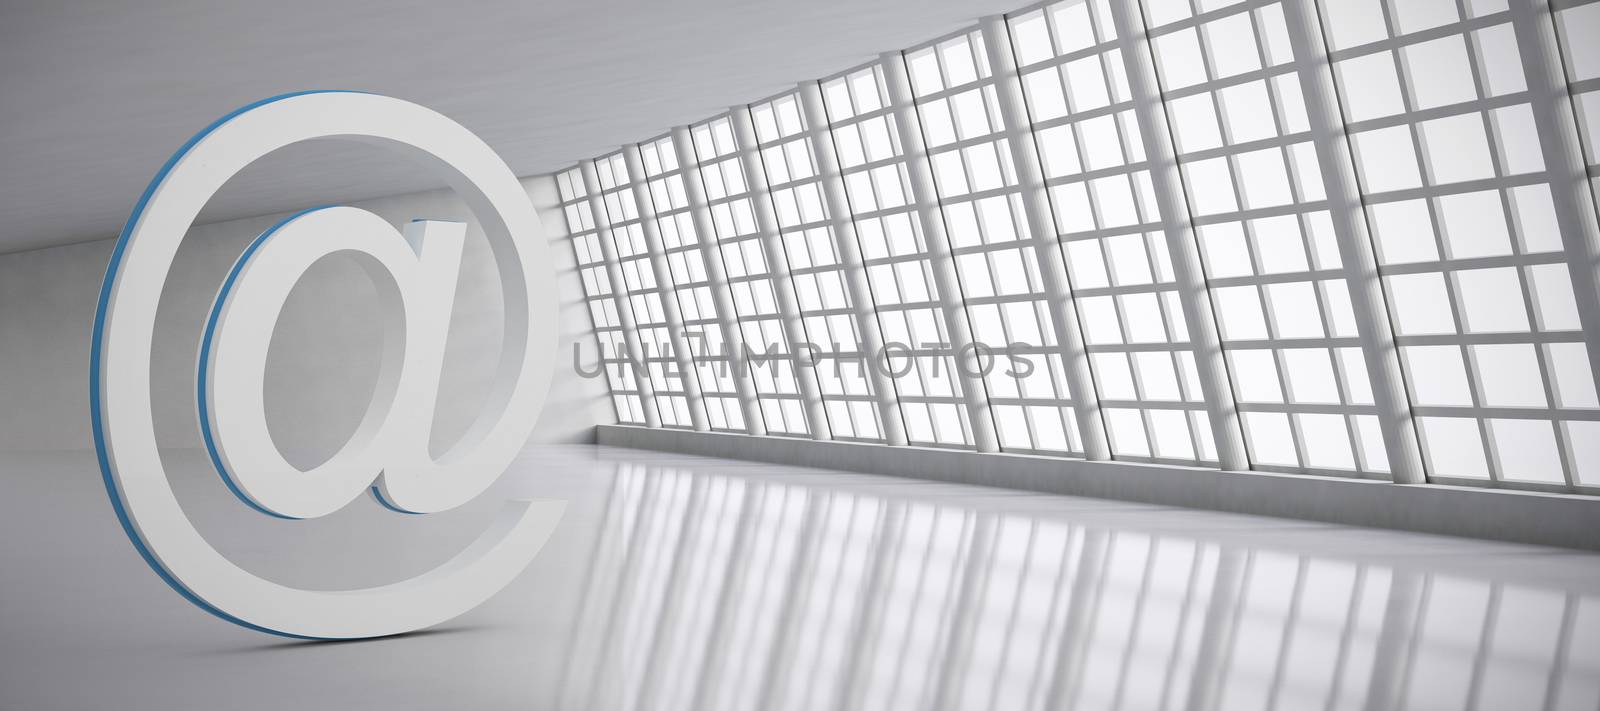 Composite image of at e-mail symbol by Wavebreakmedia